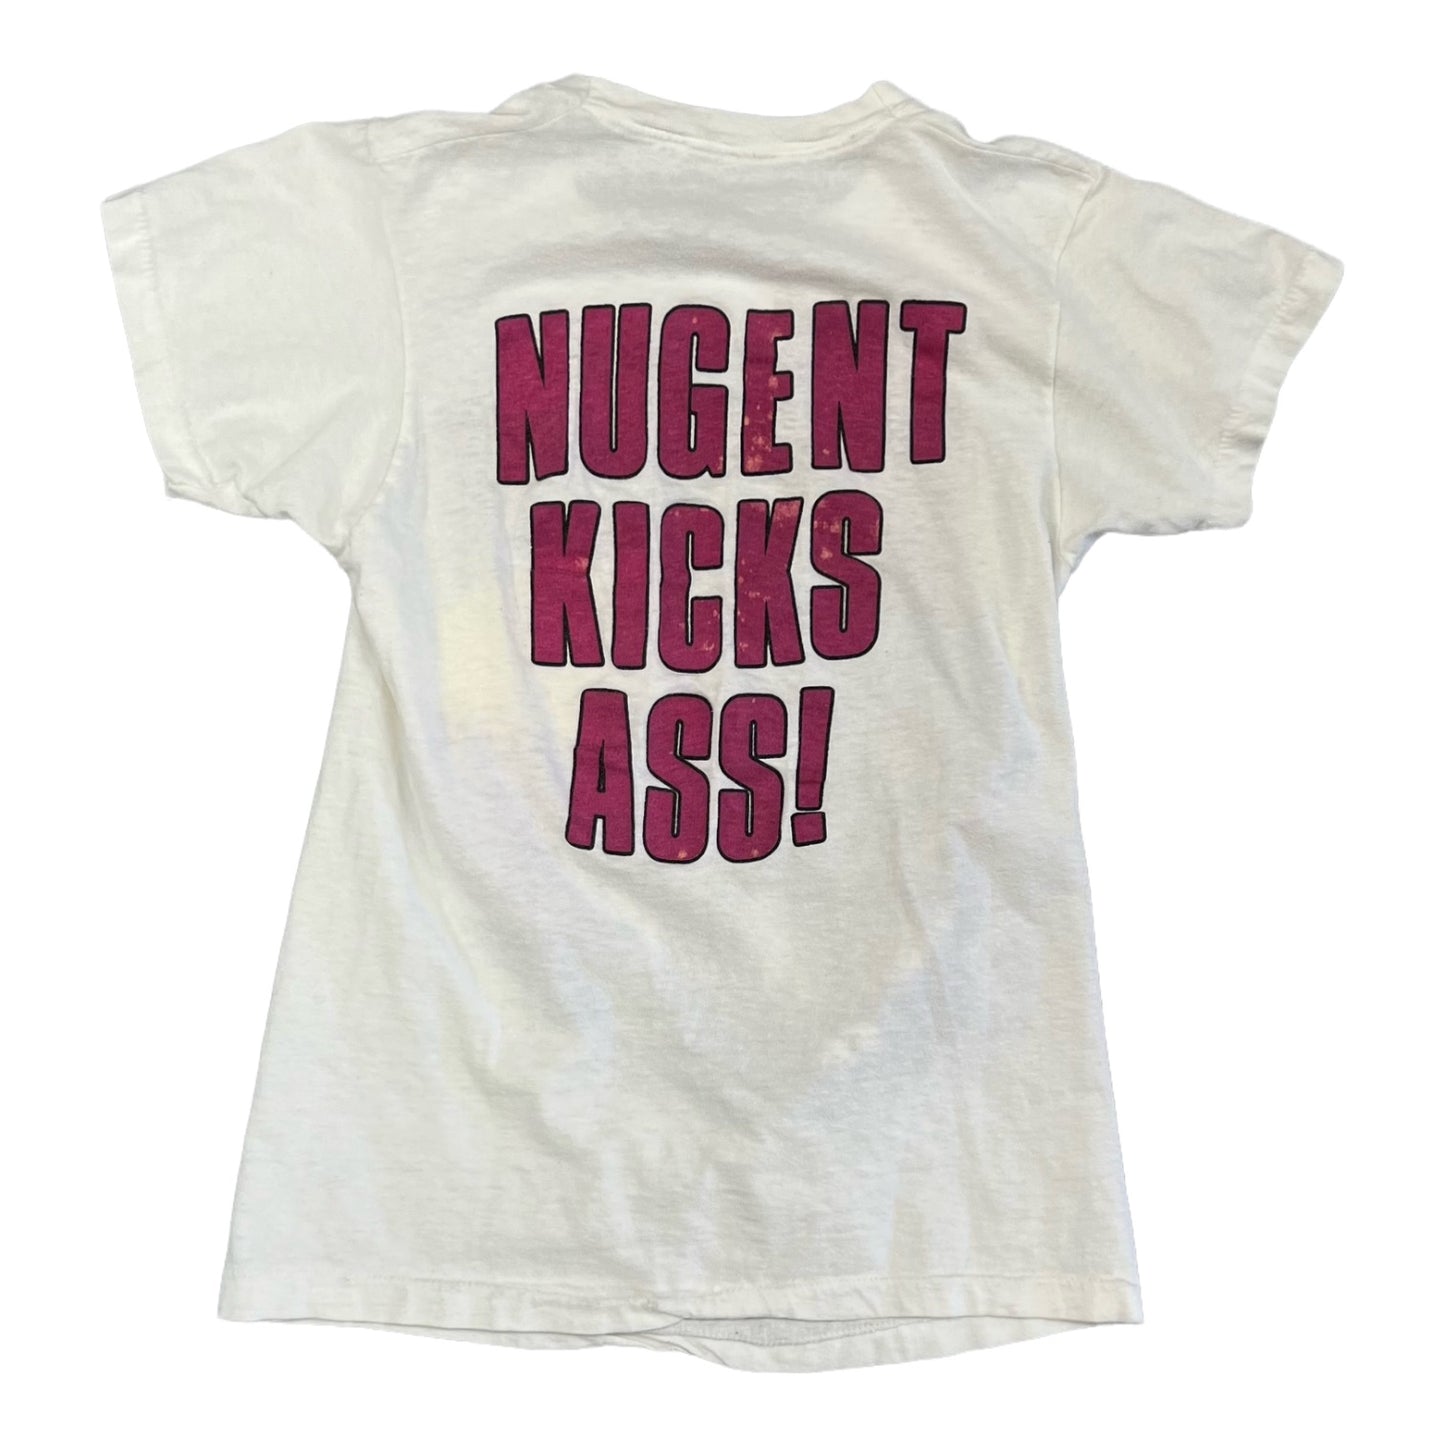 1986 Ted nugent rock band tee